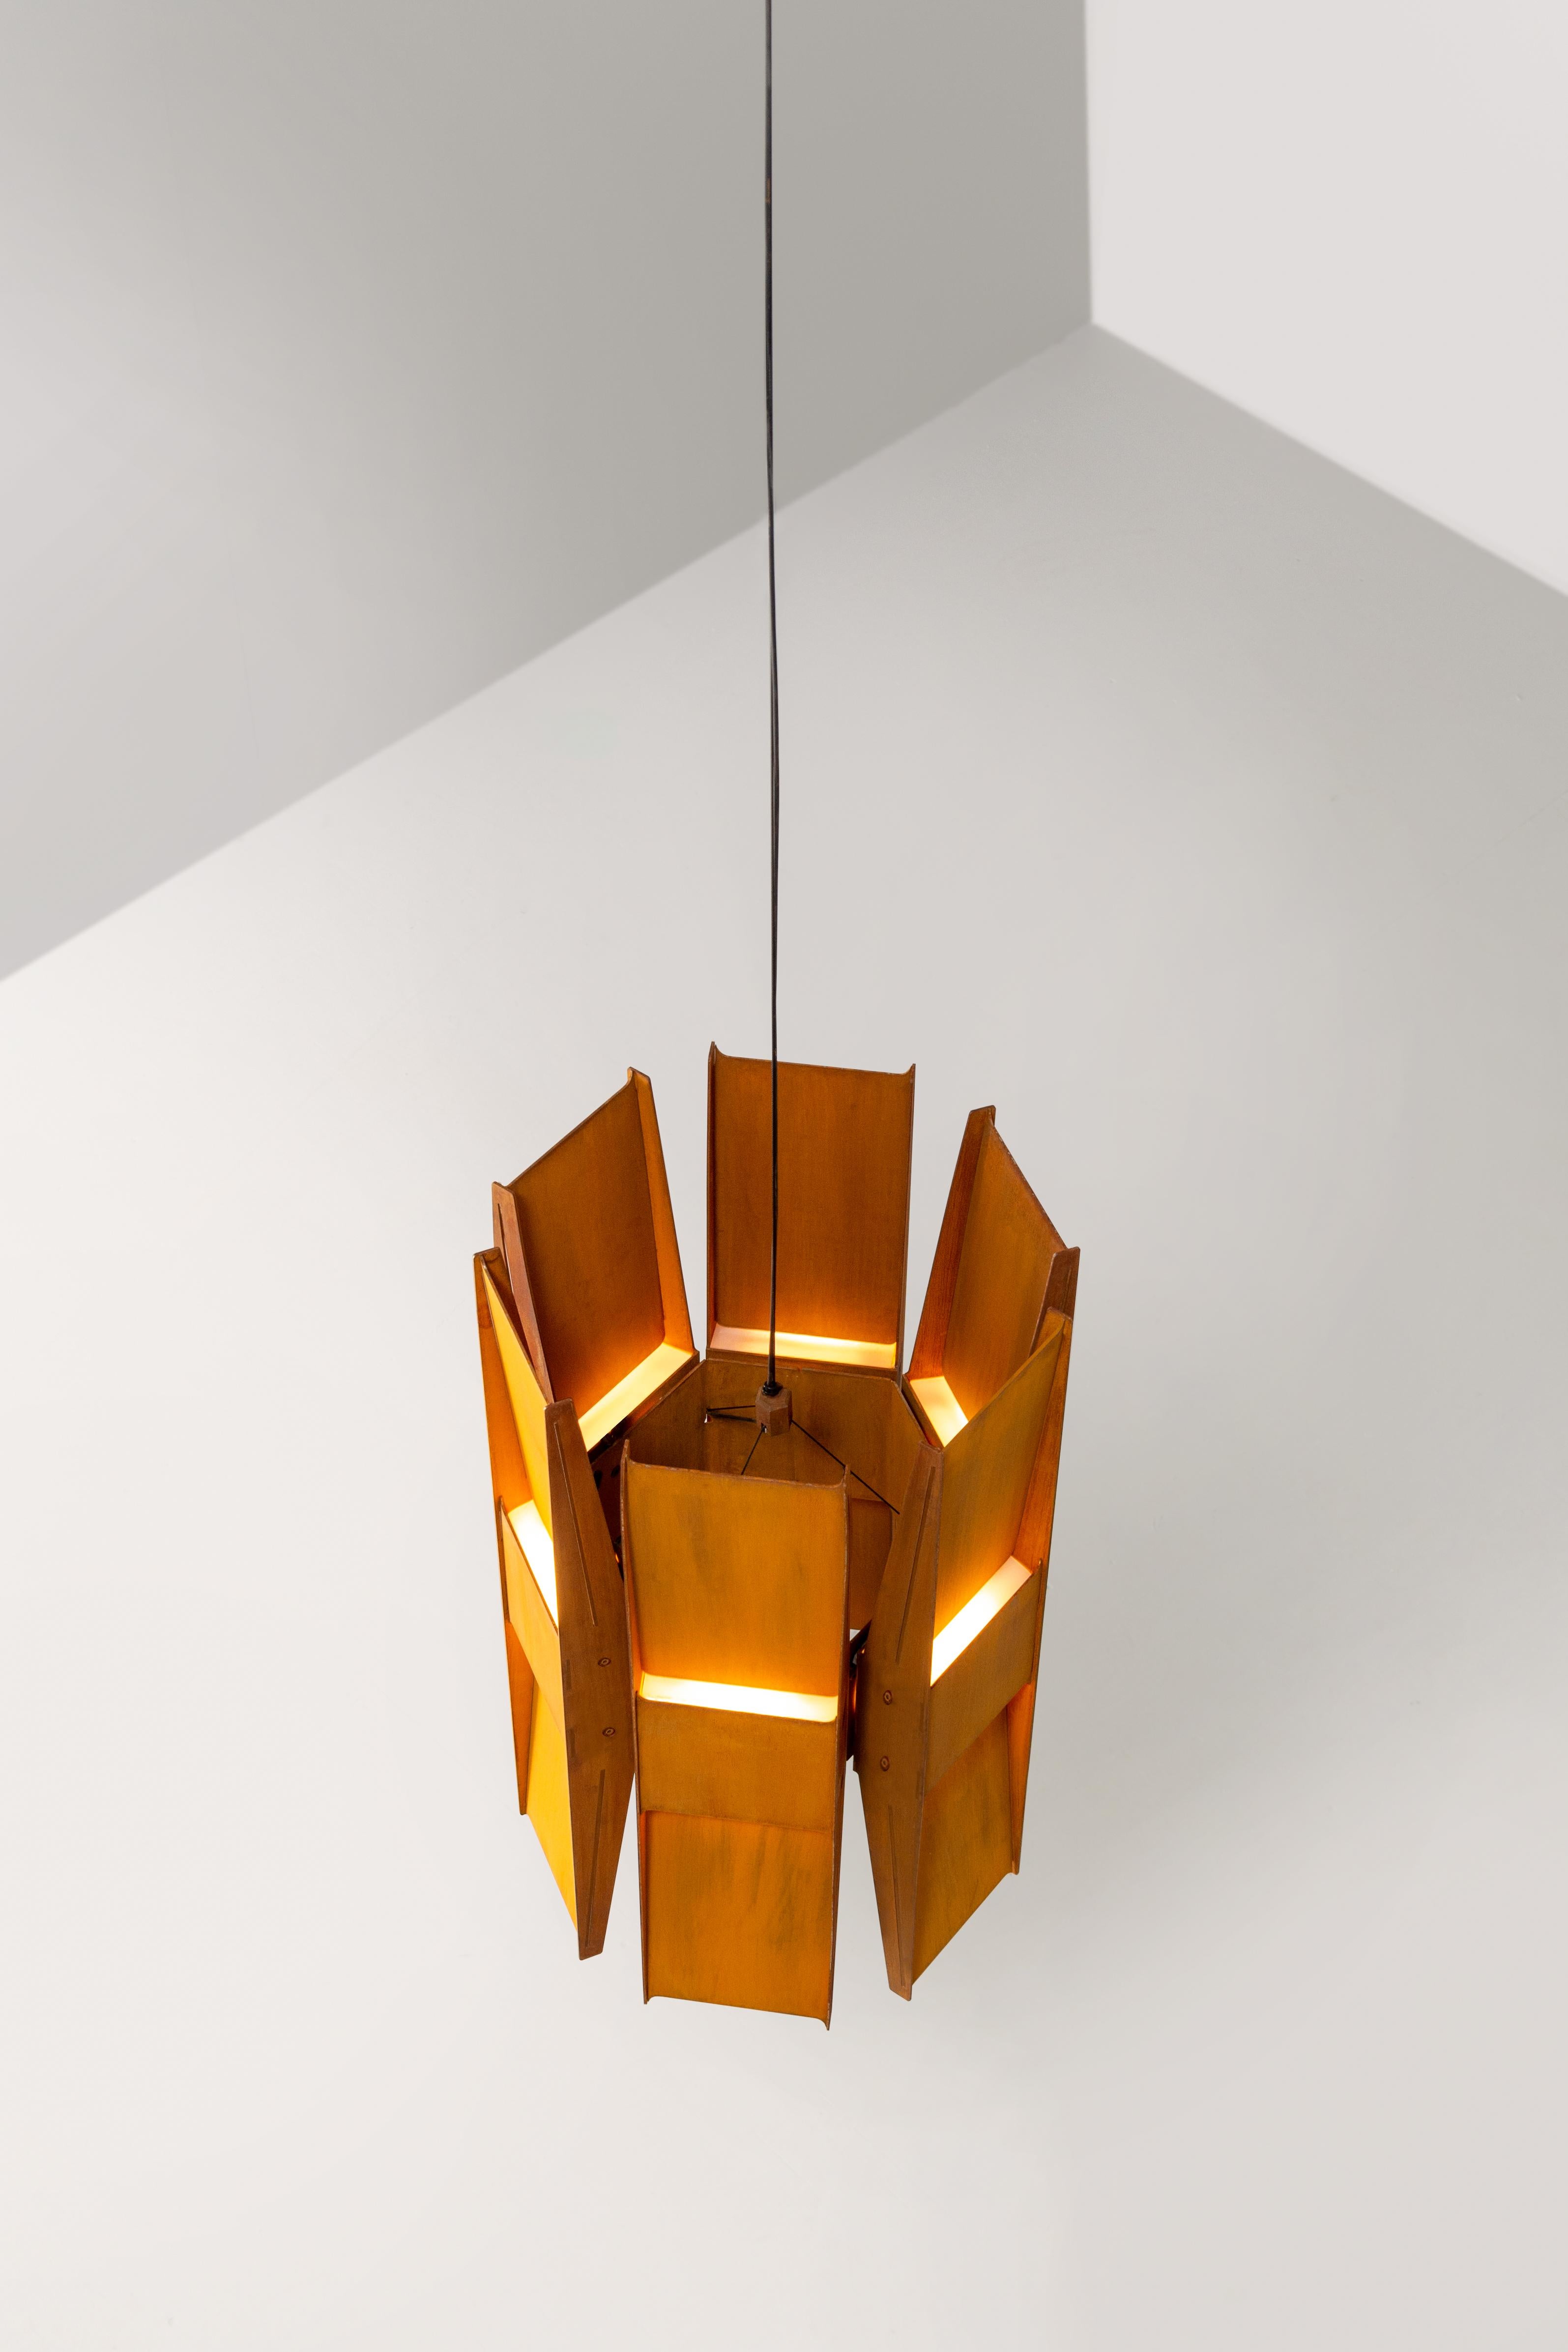 Contemporary Pendant Lamp 'Vector 6'

Model shown: Weathered Steel

DIMENSIONS
H. 58 cm x D. 34 cm / H. 22.75” x D. 13.5”

Adjustable cord length: 244 cm / 96”
* CUSTOM LENGTH AVAILABLE

ELECTRICAL
Input Voltage: 110–120V, 220–240V, 110–277V 